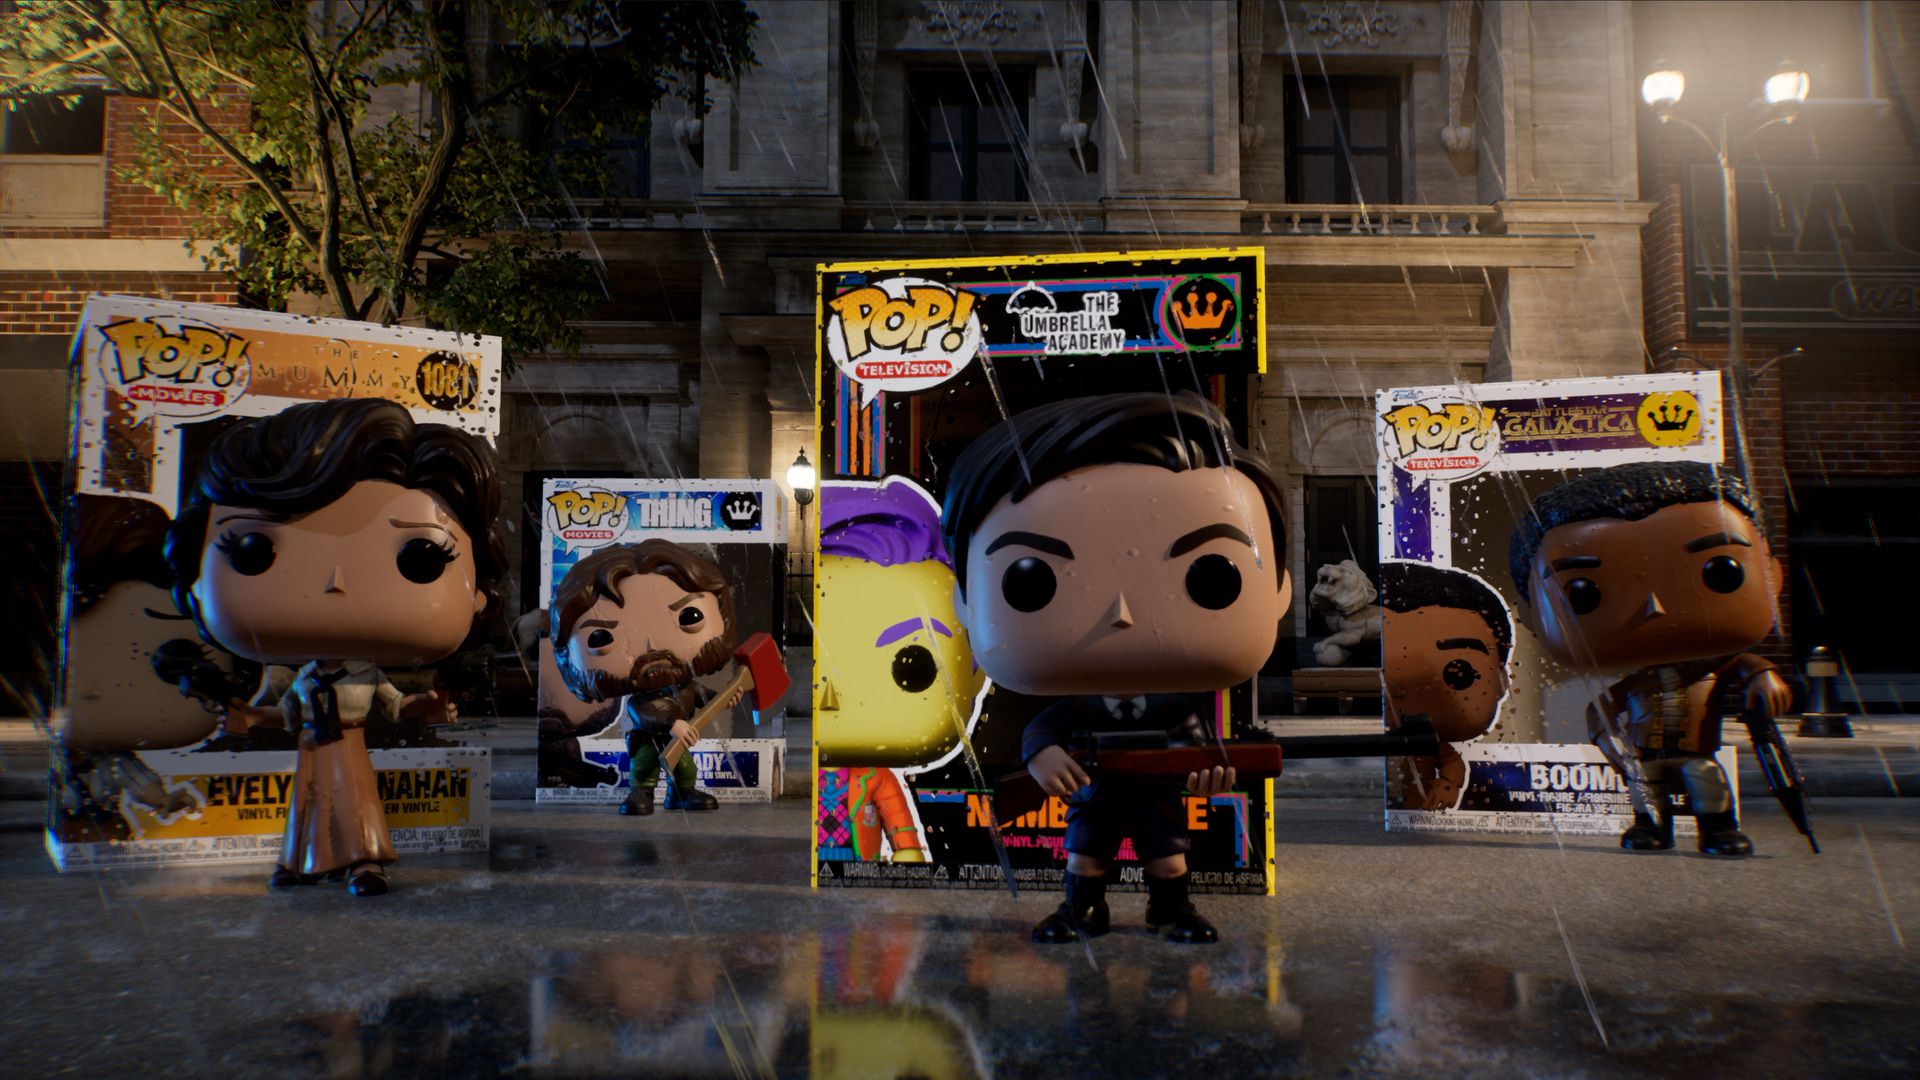 Funko Pop versions of Evelyn Carnahan from The Mummy, RJ Macready from The Thing, Number Five from The Umbrella Academy, and Boomer from Battlestar Galactica stand armed and ready in a rainy scene from Funko Fusion